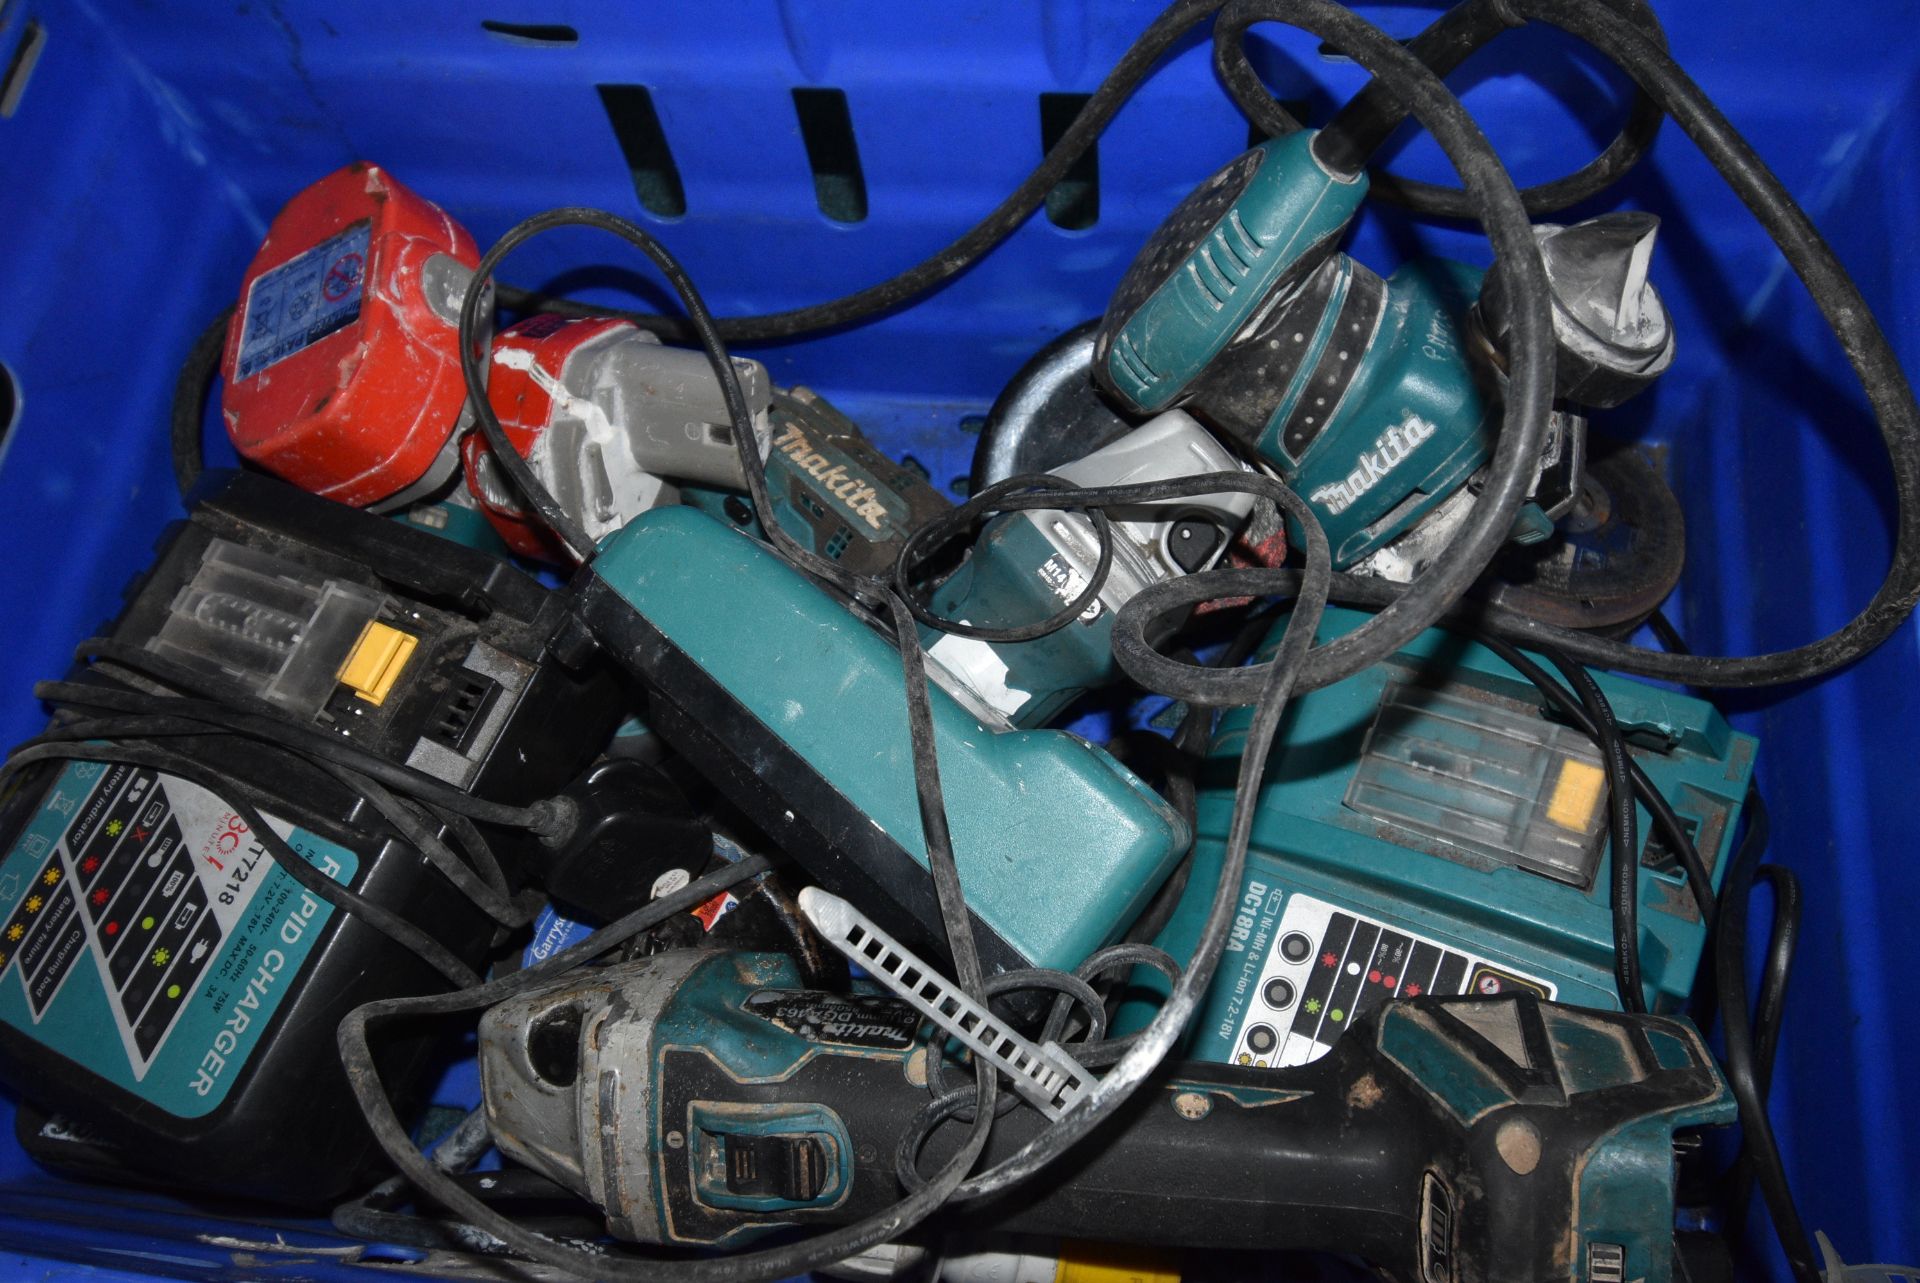 Makita Battery Operated Tools Including Palm Sander, Grinder, Angle Grinder, etc. with Assorted - Image 2 of 2